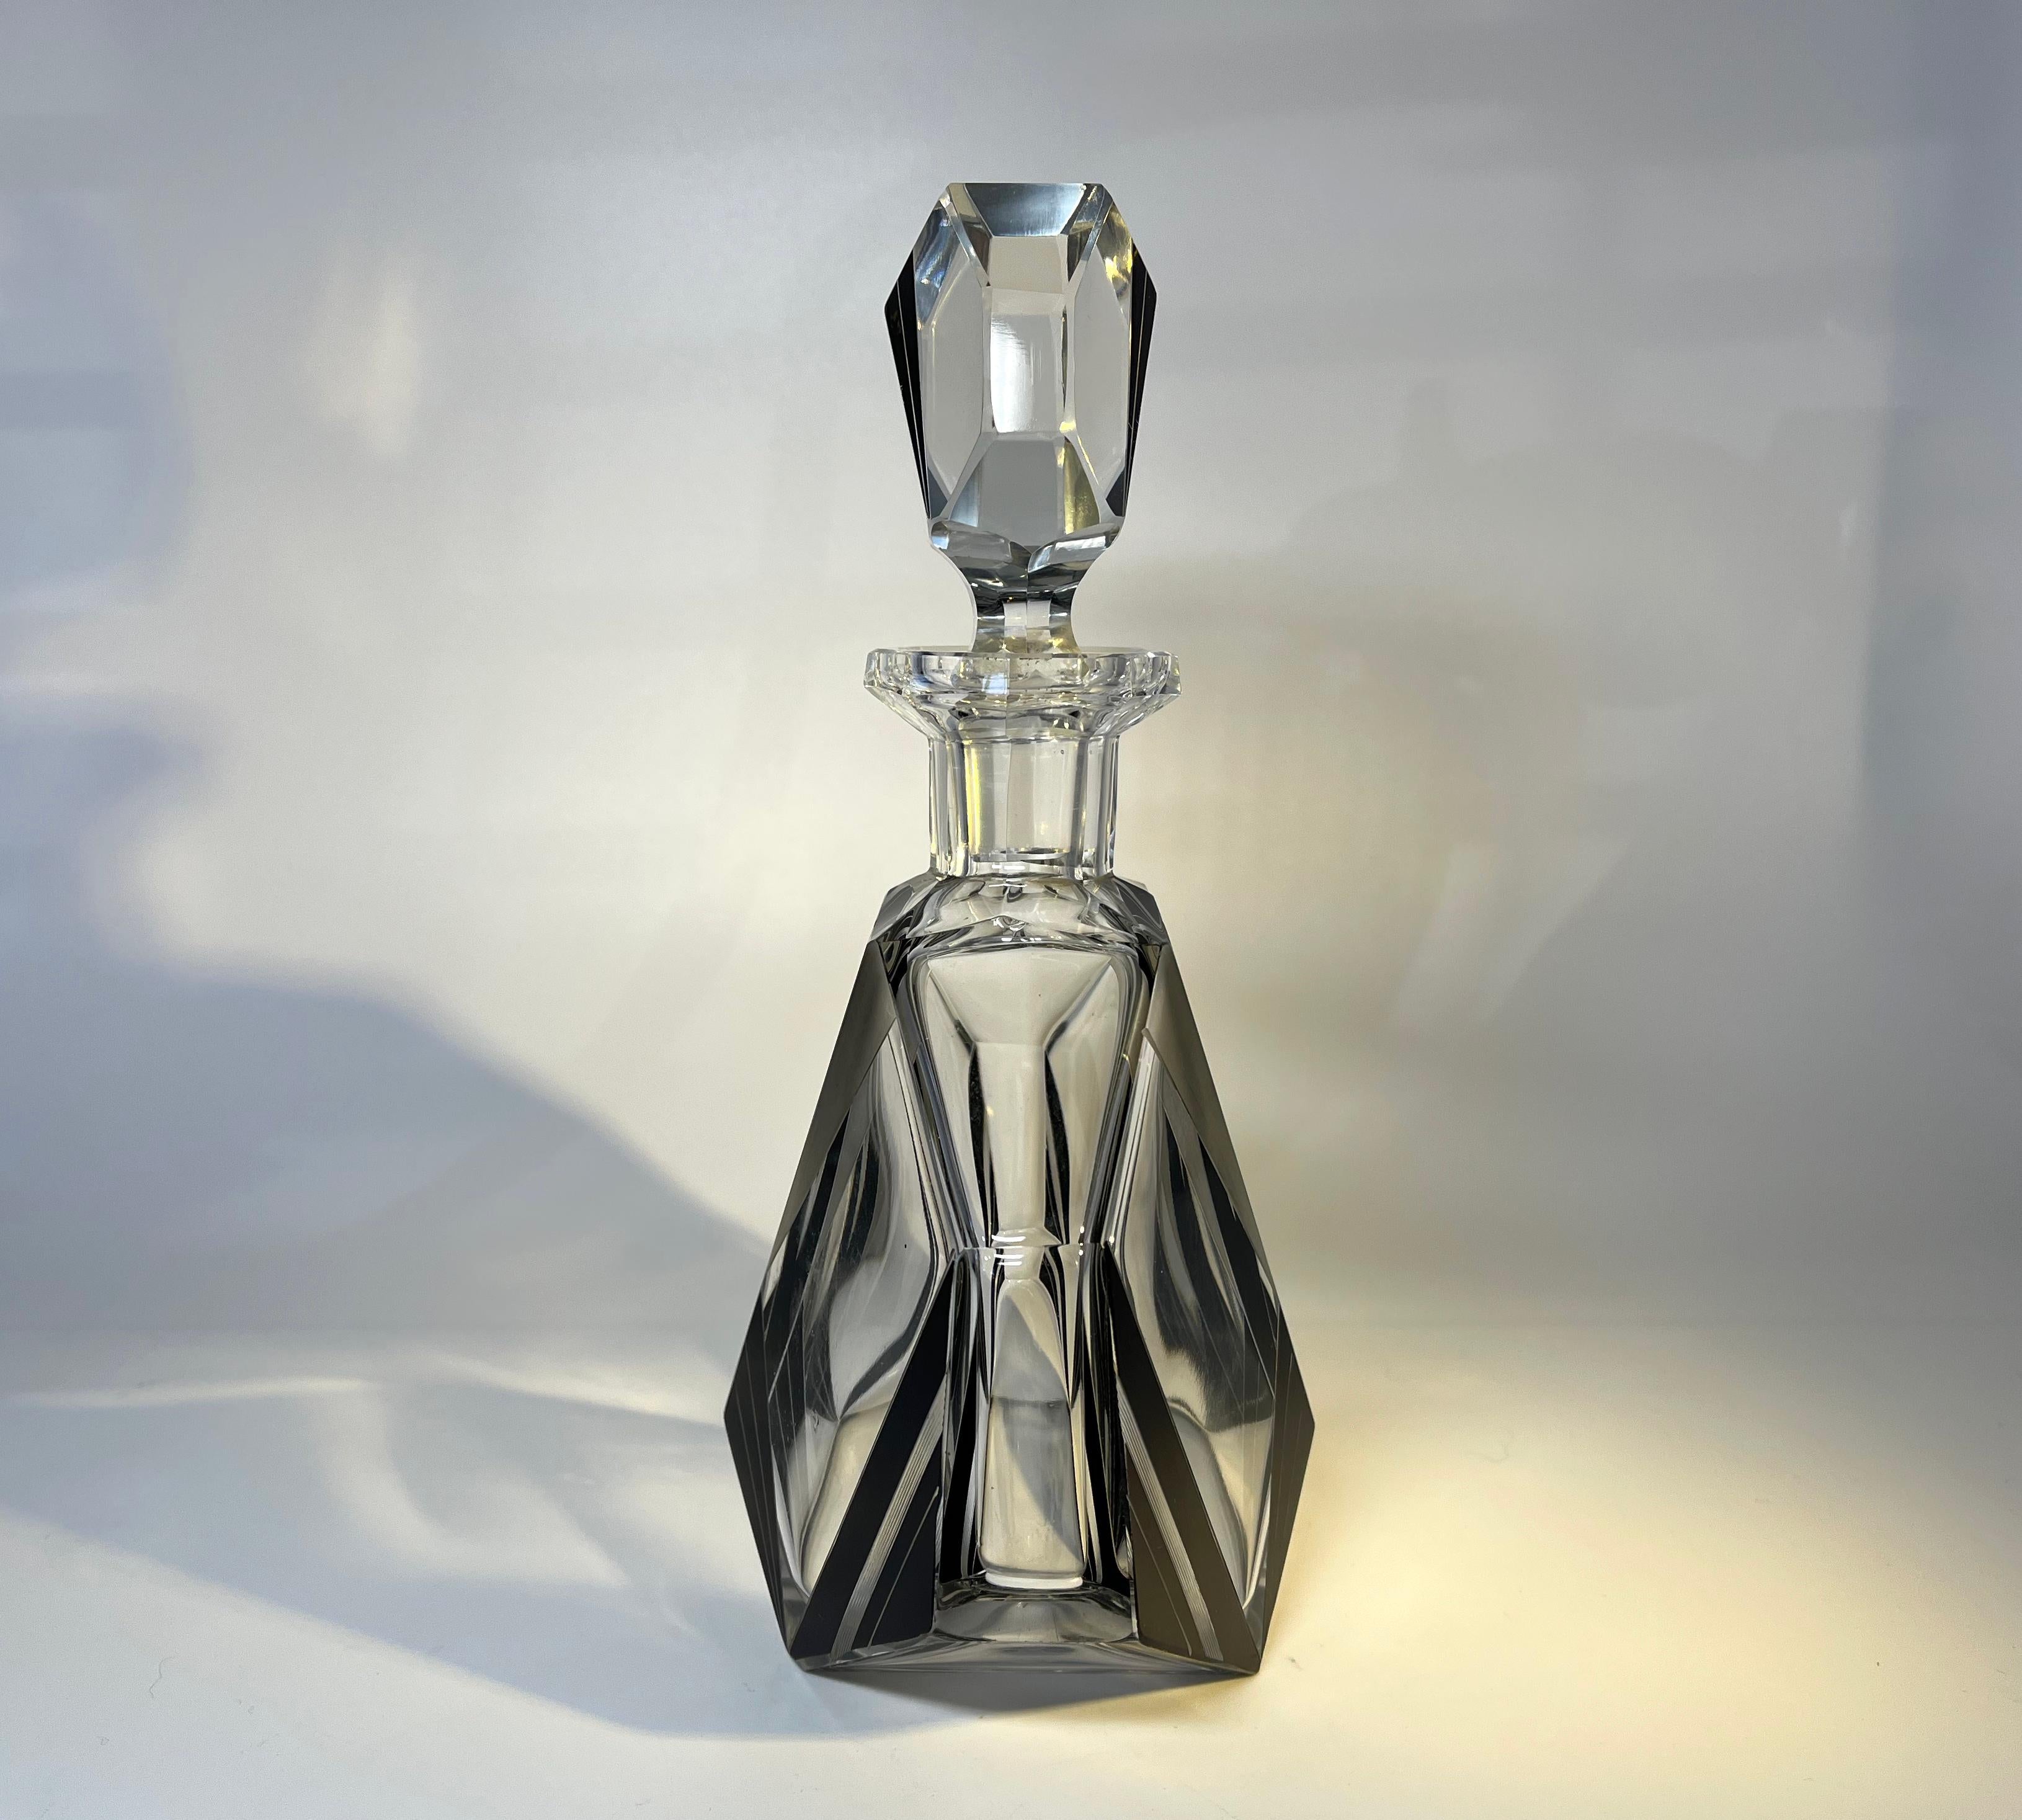 Oversized, Decadent Art Deco Czech Crystal Bohemian Perfume Flacon 1930's In Good Condition For Sale In Rothley, Leicestershire